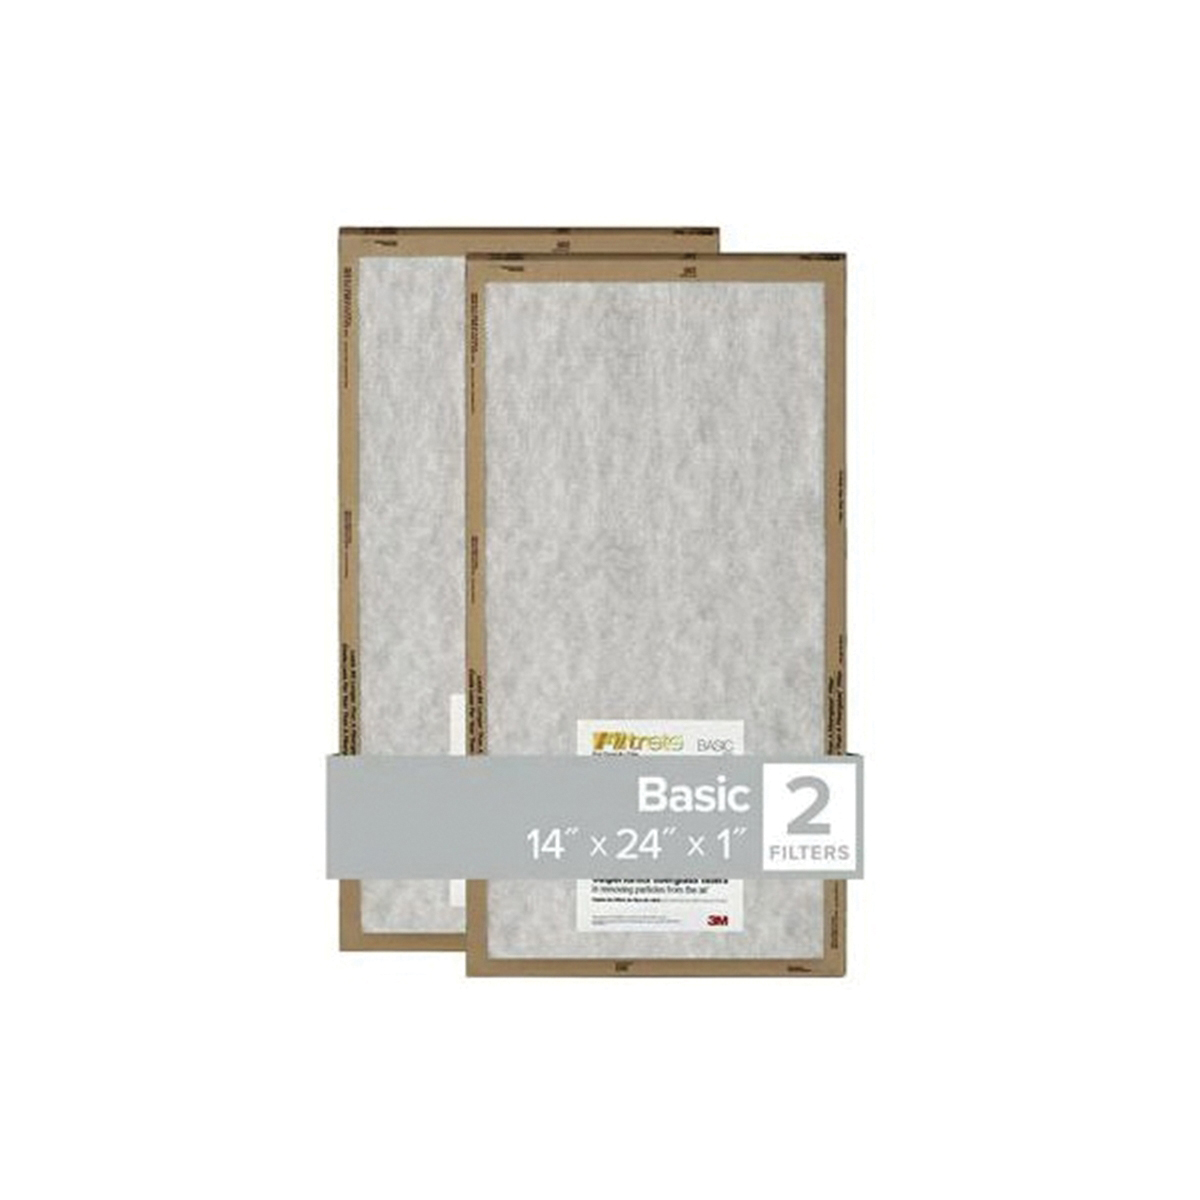 Filtrete FPL23-2PK-24 Air Filter, 24 in L, 14 in W, 2 MERV, For: Air Conditioner, Furnace and HVAC System - 1